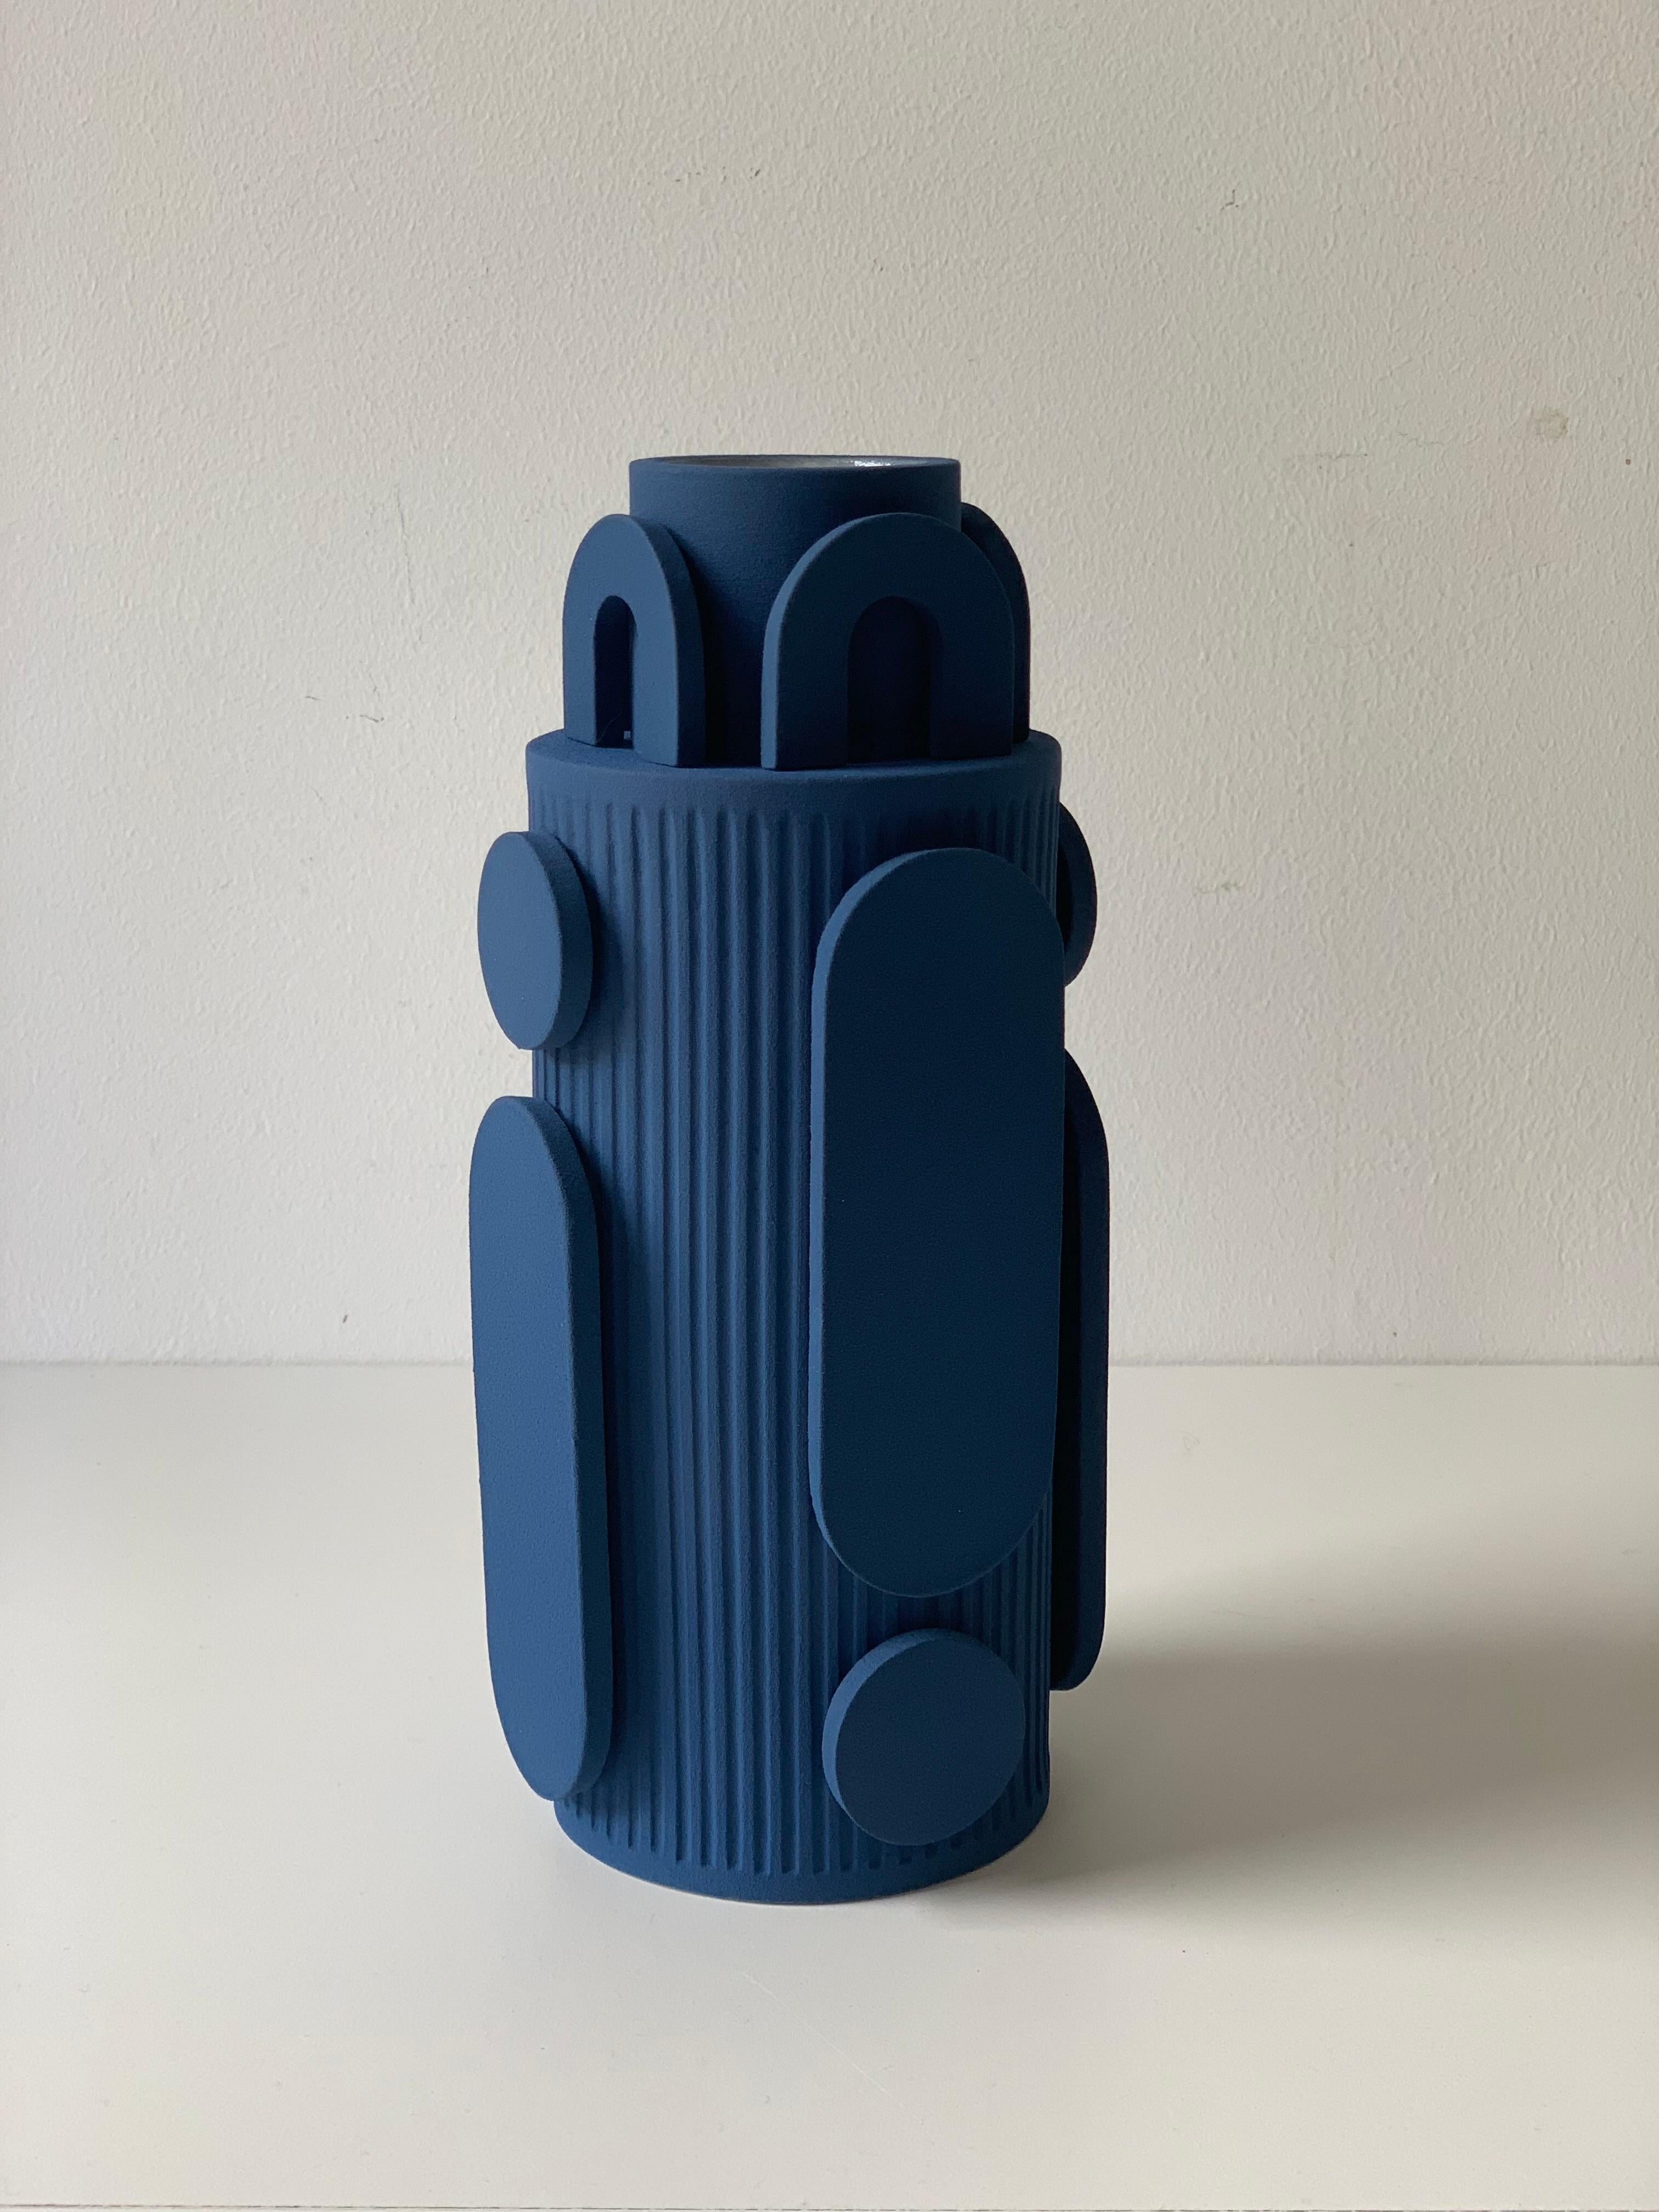 Gatsby vase by Séverine Digonnet
Dimensions: D 10 x W 15 x H 23 cm.
Materials: stoneware.
Available in other colors. 

Séverine Digonnet
I discovered ceramics in 2017 in Kayoko Hayasaki's studio in the heart of the Marais, in Paris. The first